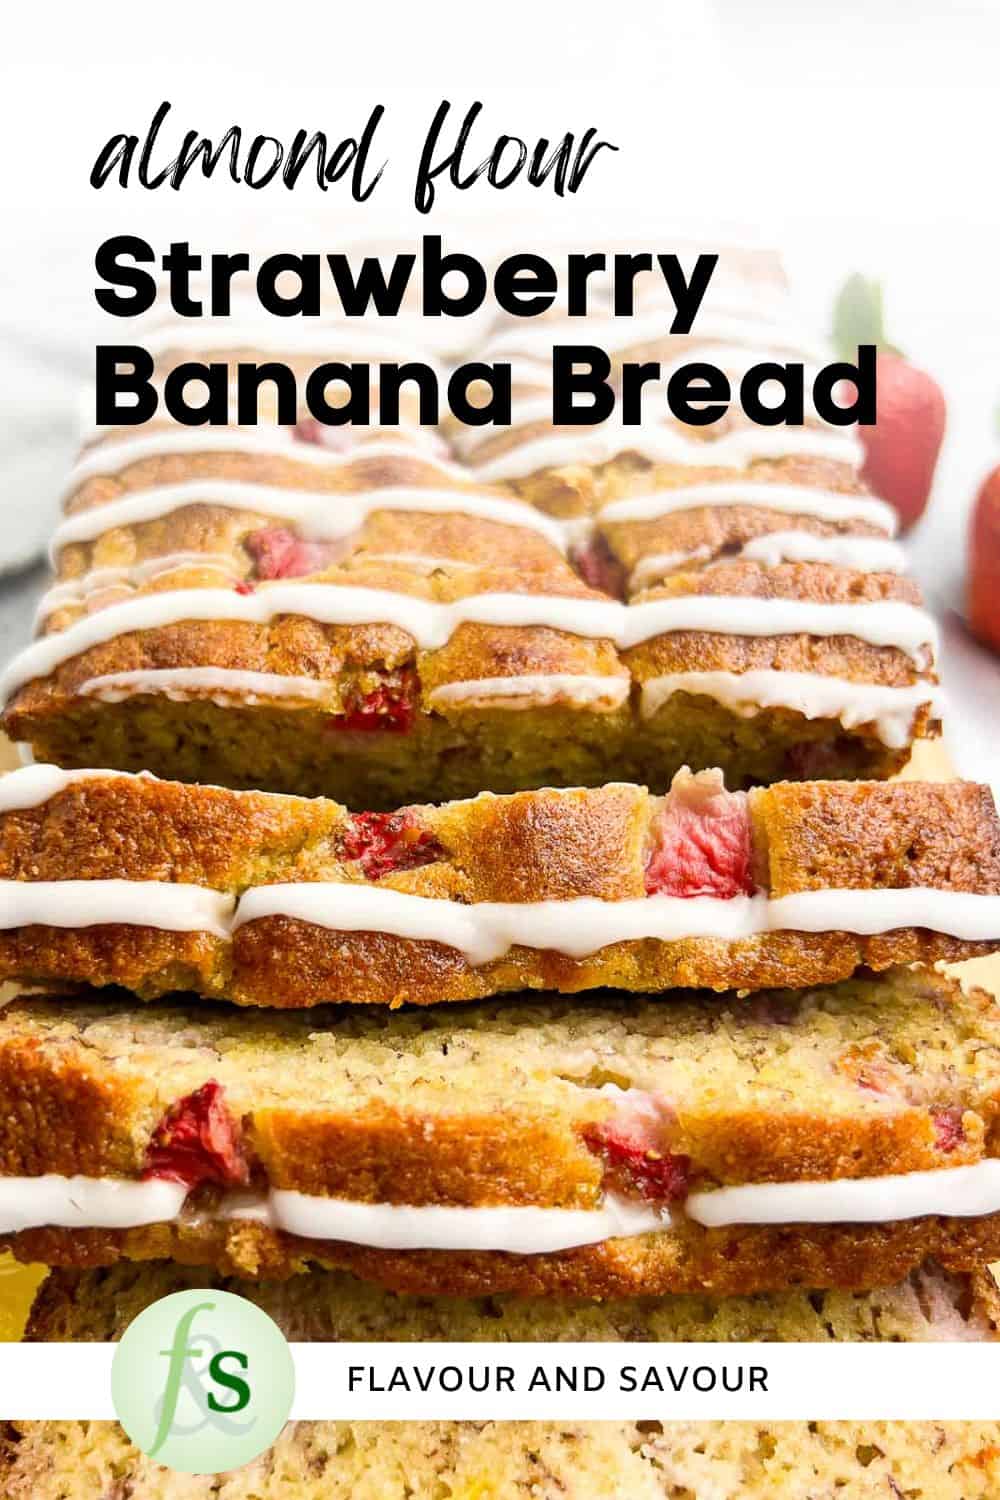 Image with text for Almond Flour Strawberry Banana Bread with Lemon Glaze.